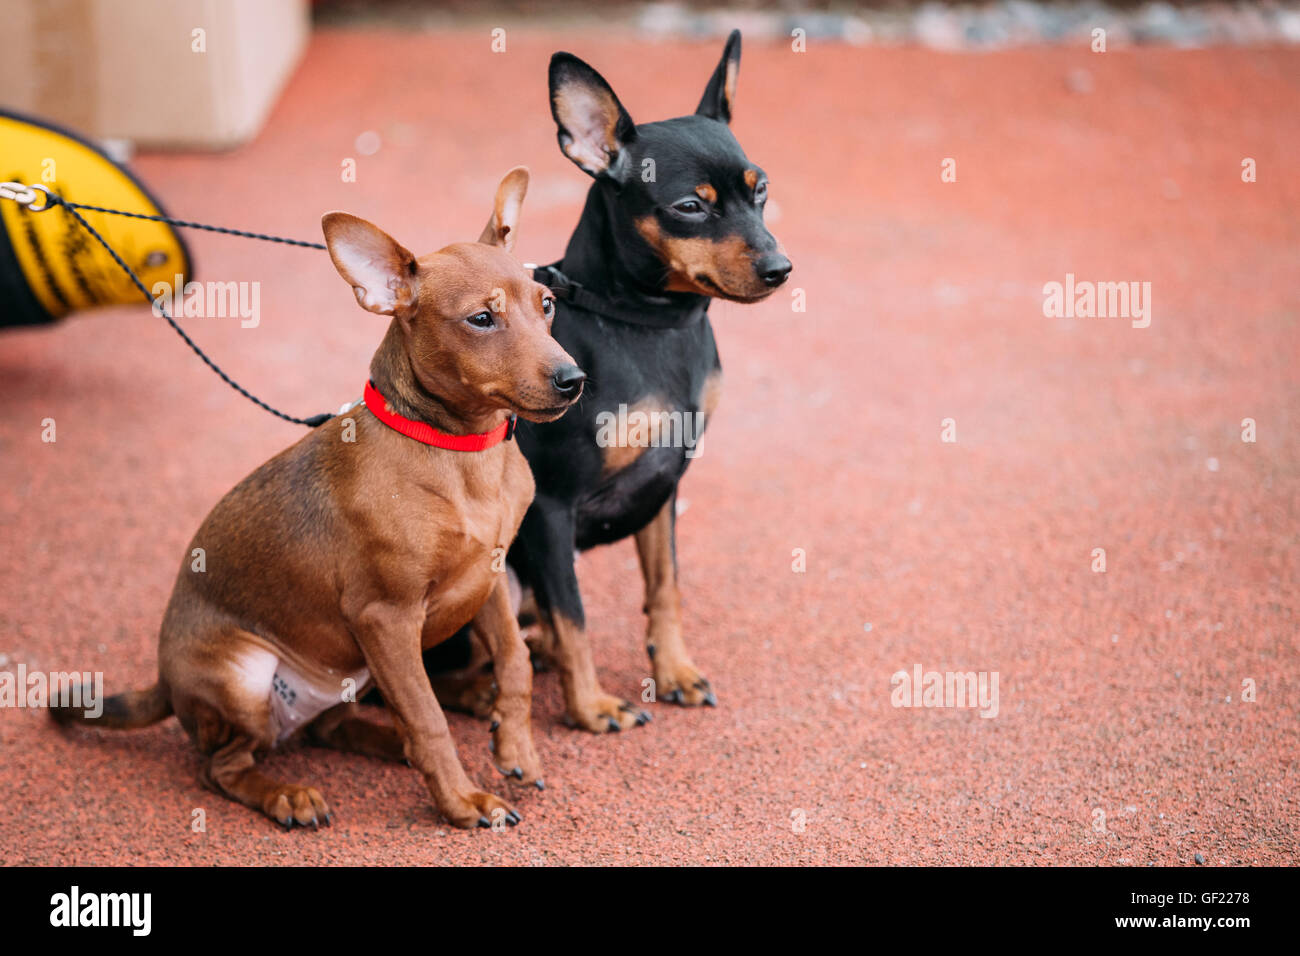 Two Funny Brown And Black Miniature Pinschers Pinchers Sitting Together On Red Floor Stock Photo